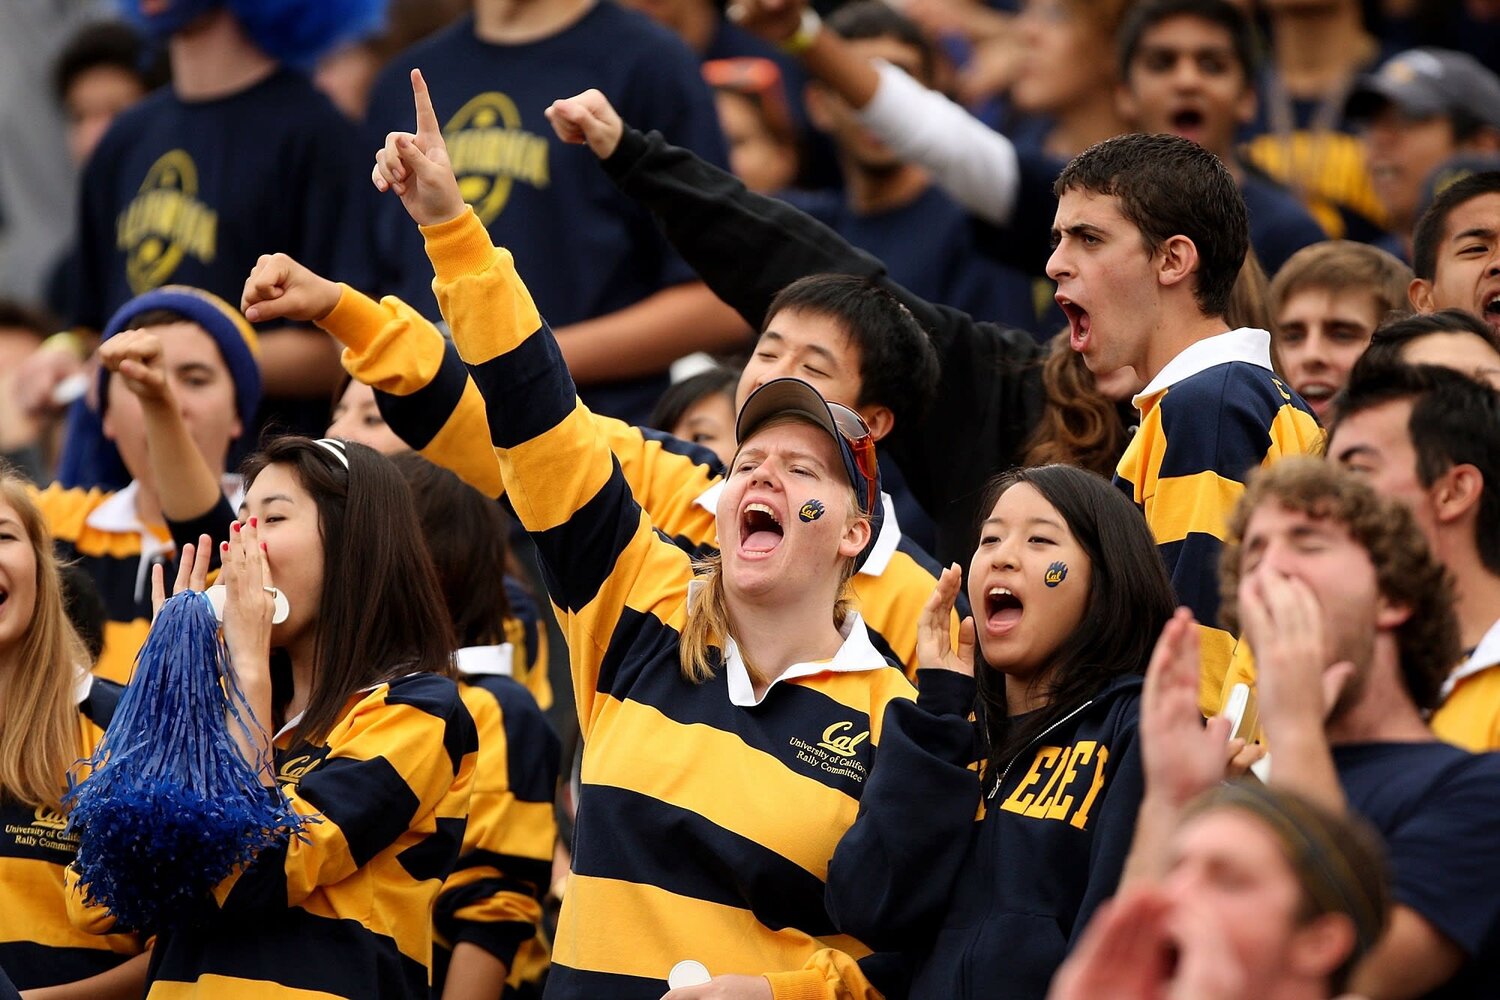 Cal sports fans cheering at a game